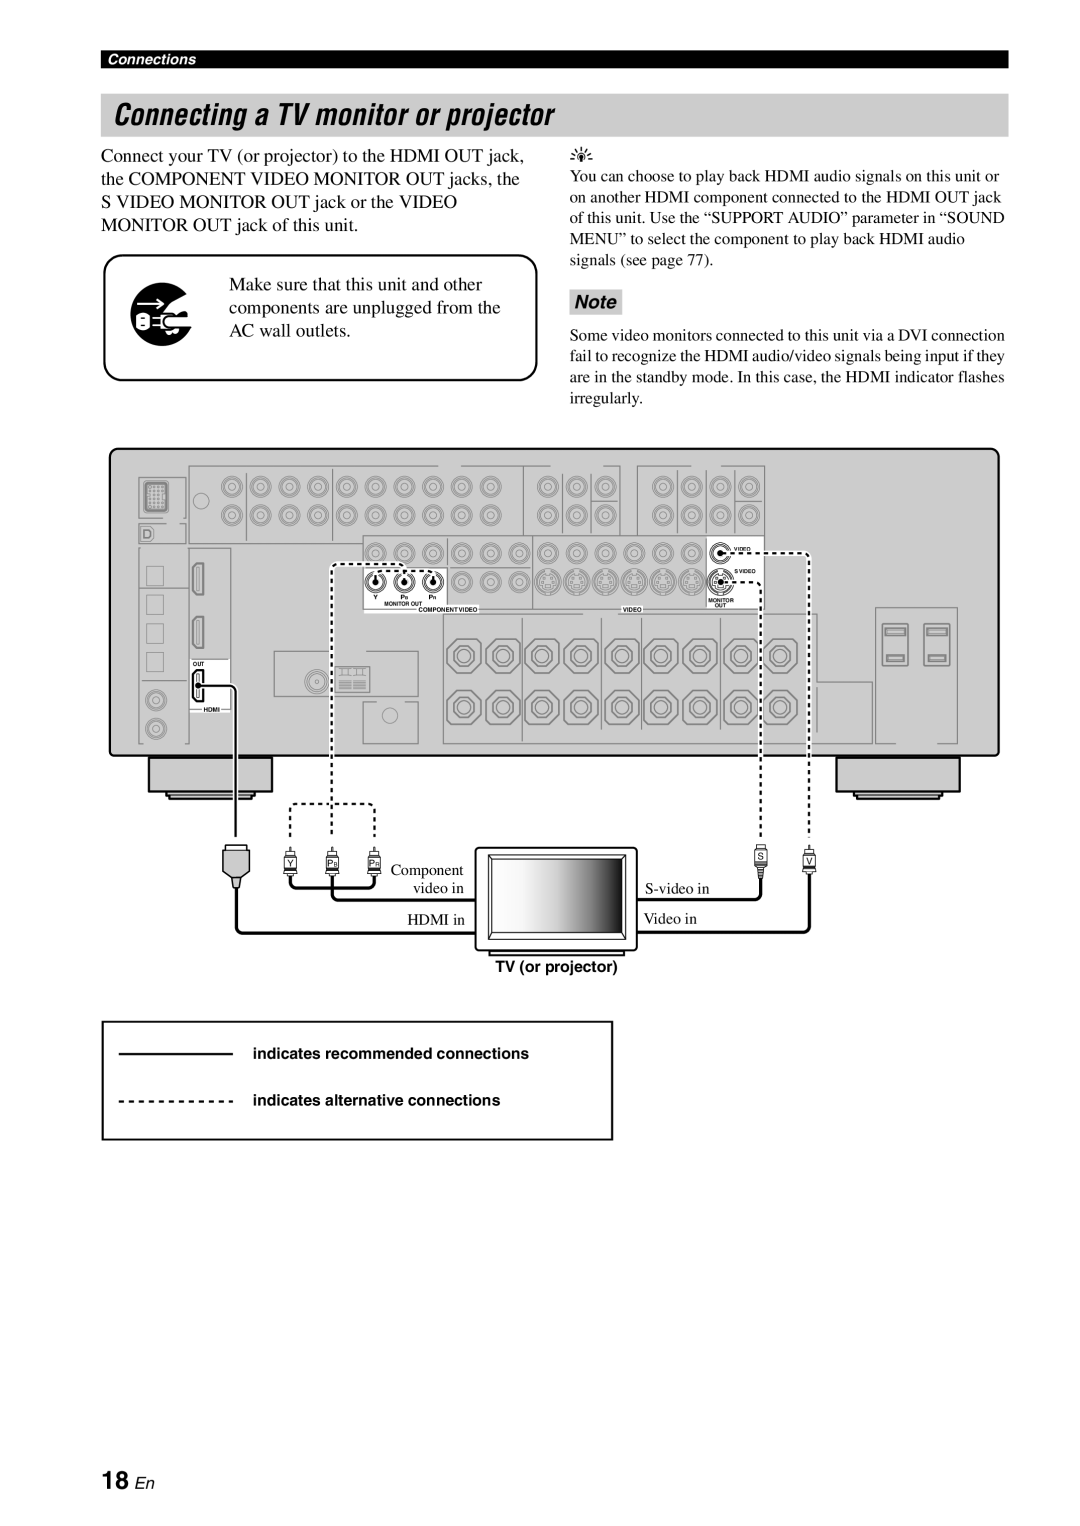 Yamaha HTR-6080 owner manual Connecting a TV monitor or projector, 18 En 